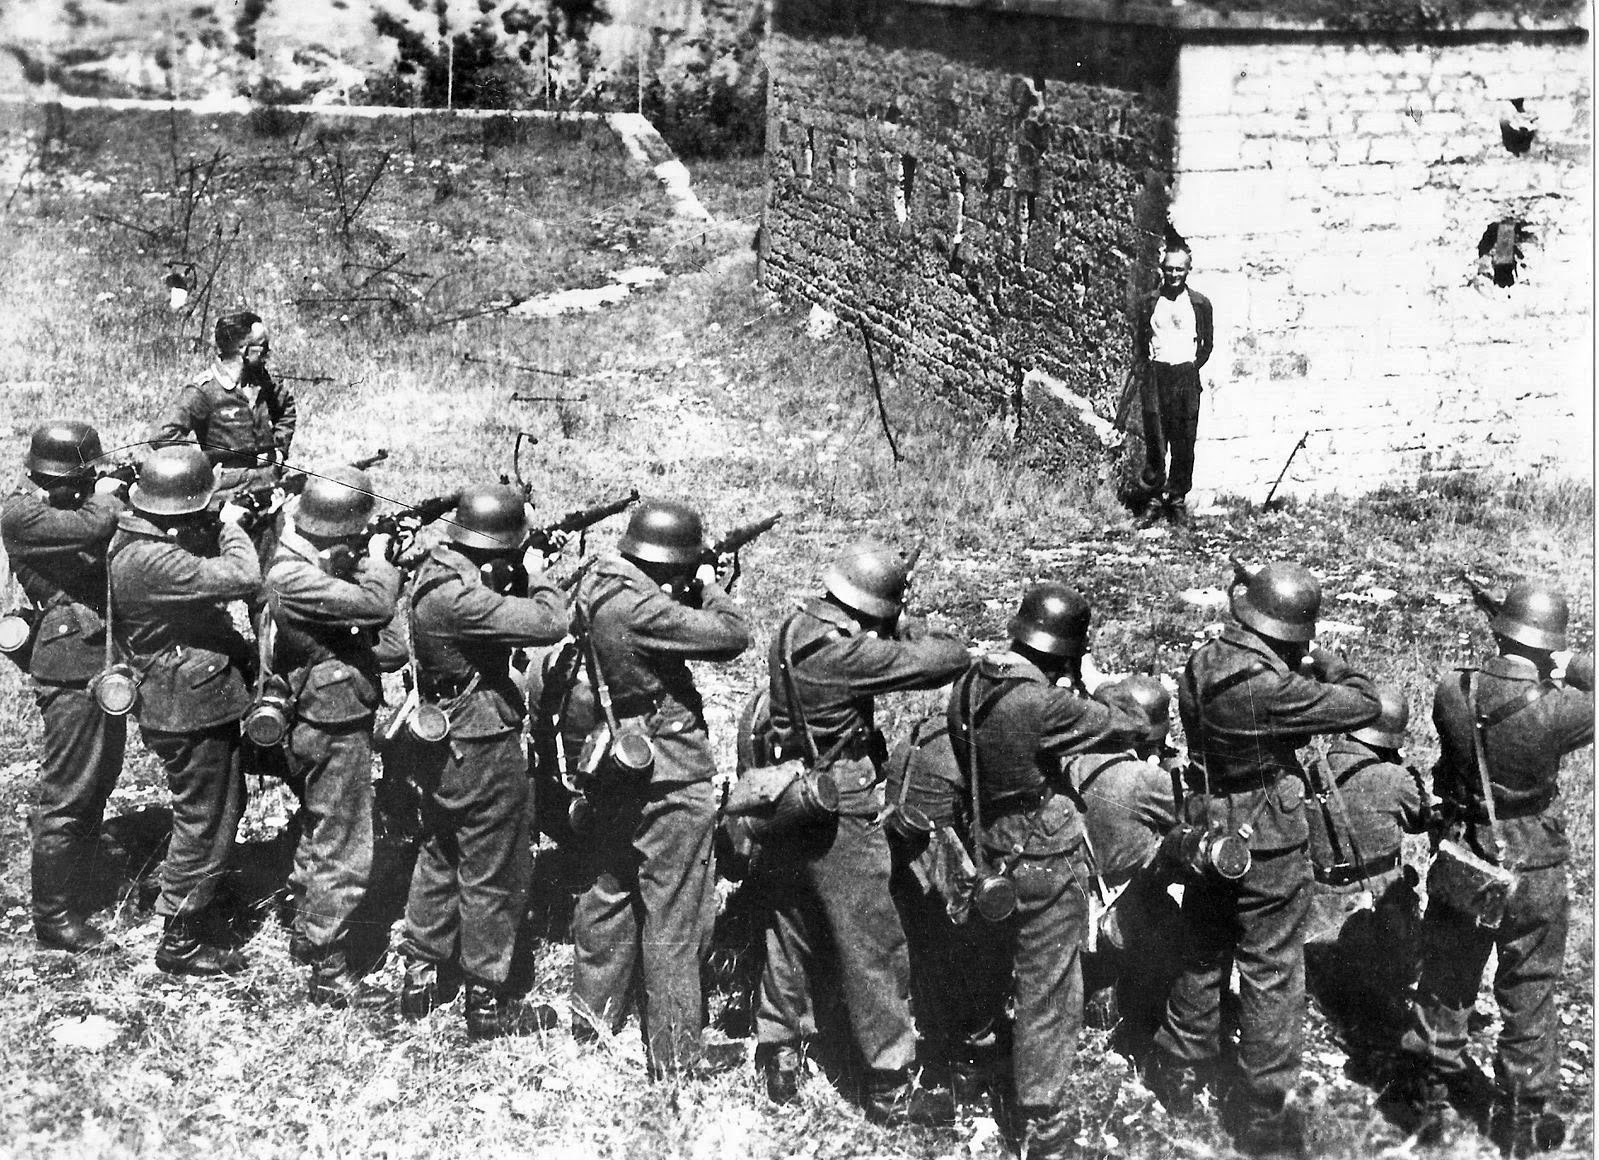 Georges Blind, a member of the French resistance, smiling at a German firing squad, October 1944 